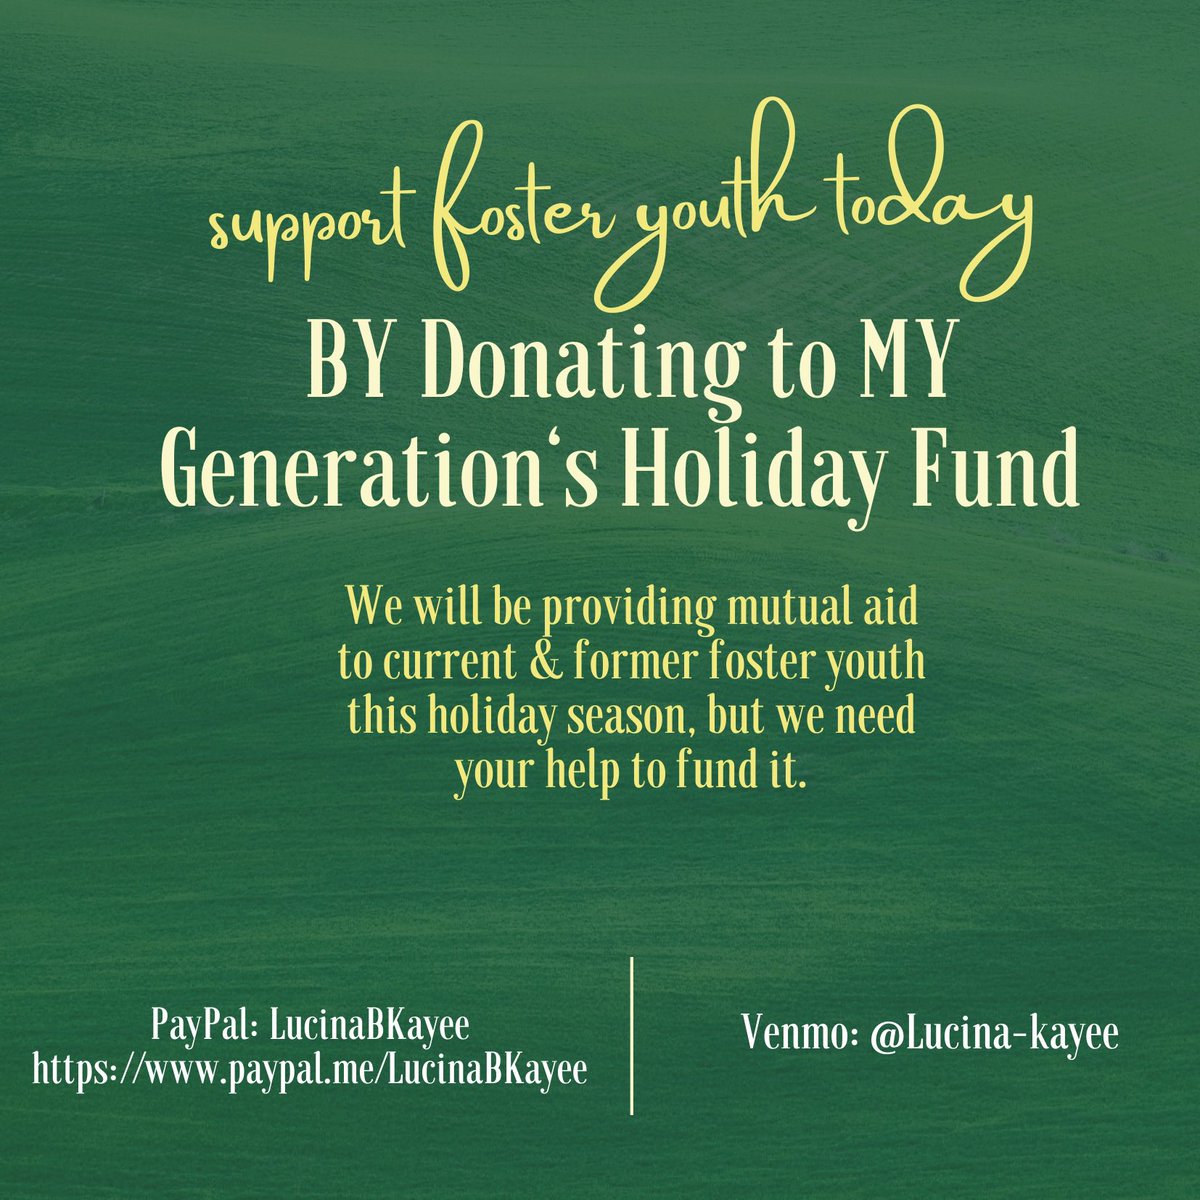 I work with youth in foster care, and right now, we are raising money for our holiday mutual aid fund, which will allow us to redistribute funds to Black foster youth in Minnesota. Please, send any funds to Venmo:  @Lucina-kayee or PayPal: LucinaBKayee  https://www.paypal.me/LucinaBKayee 